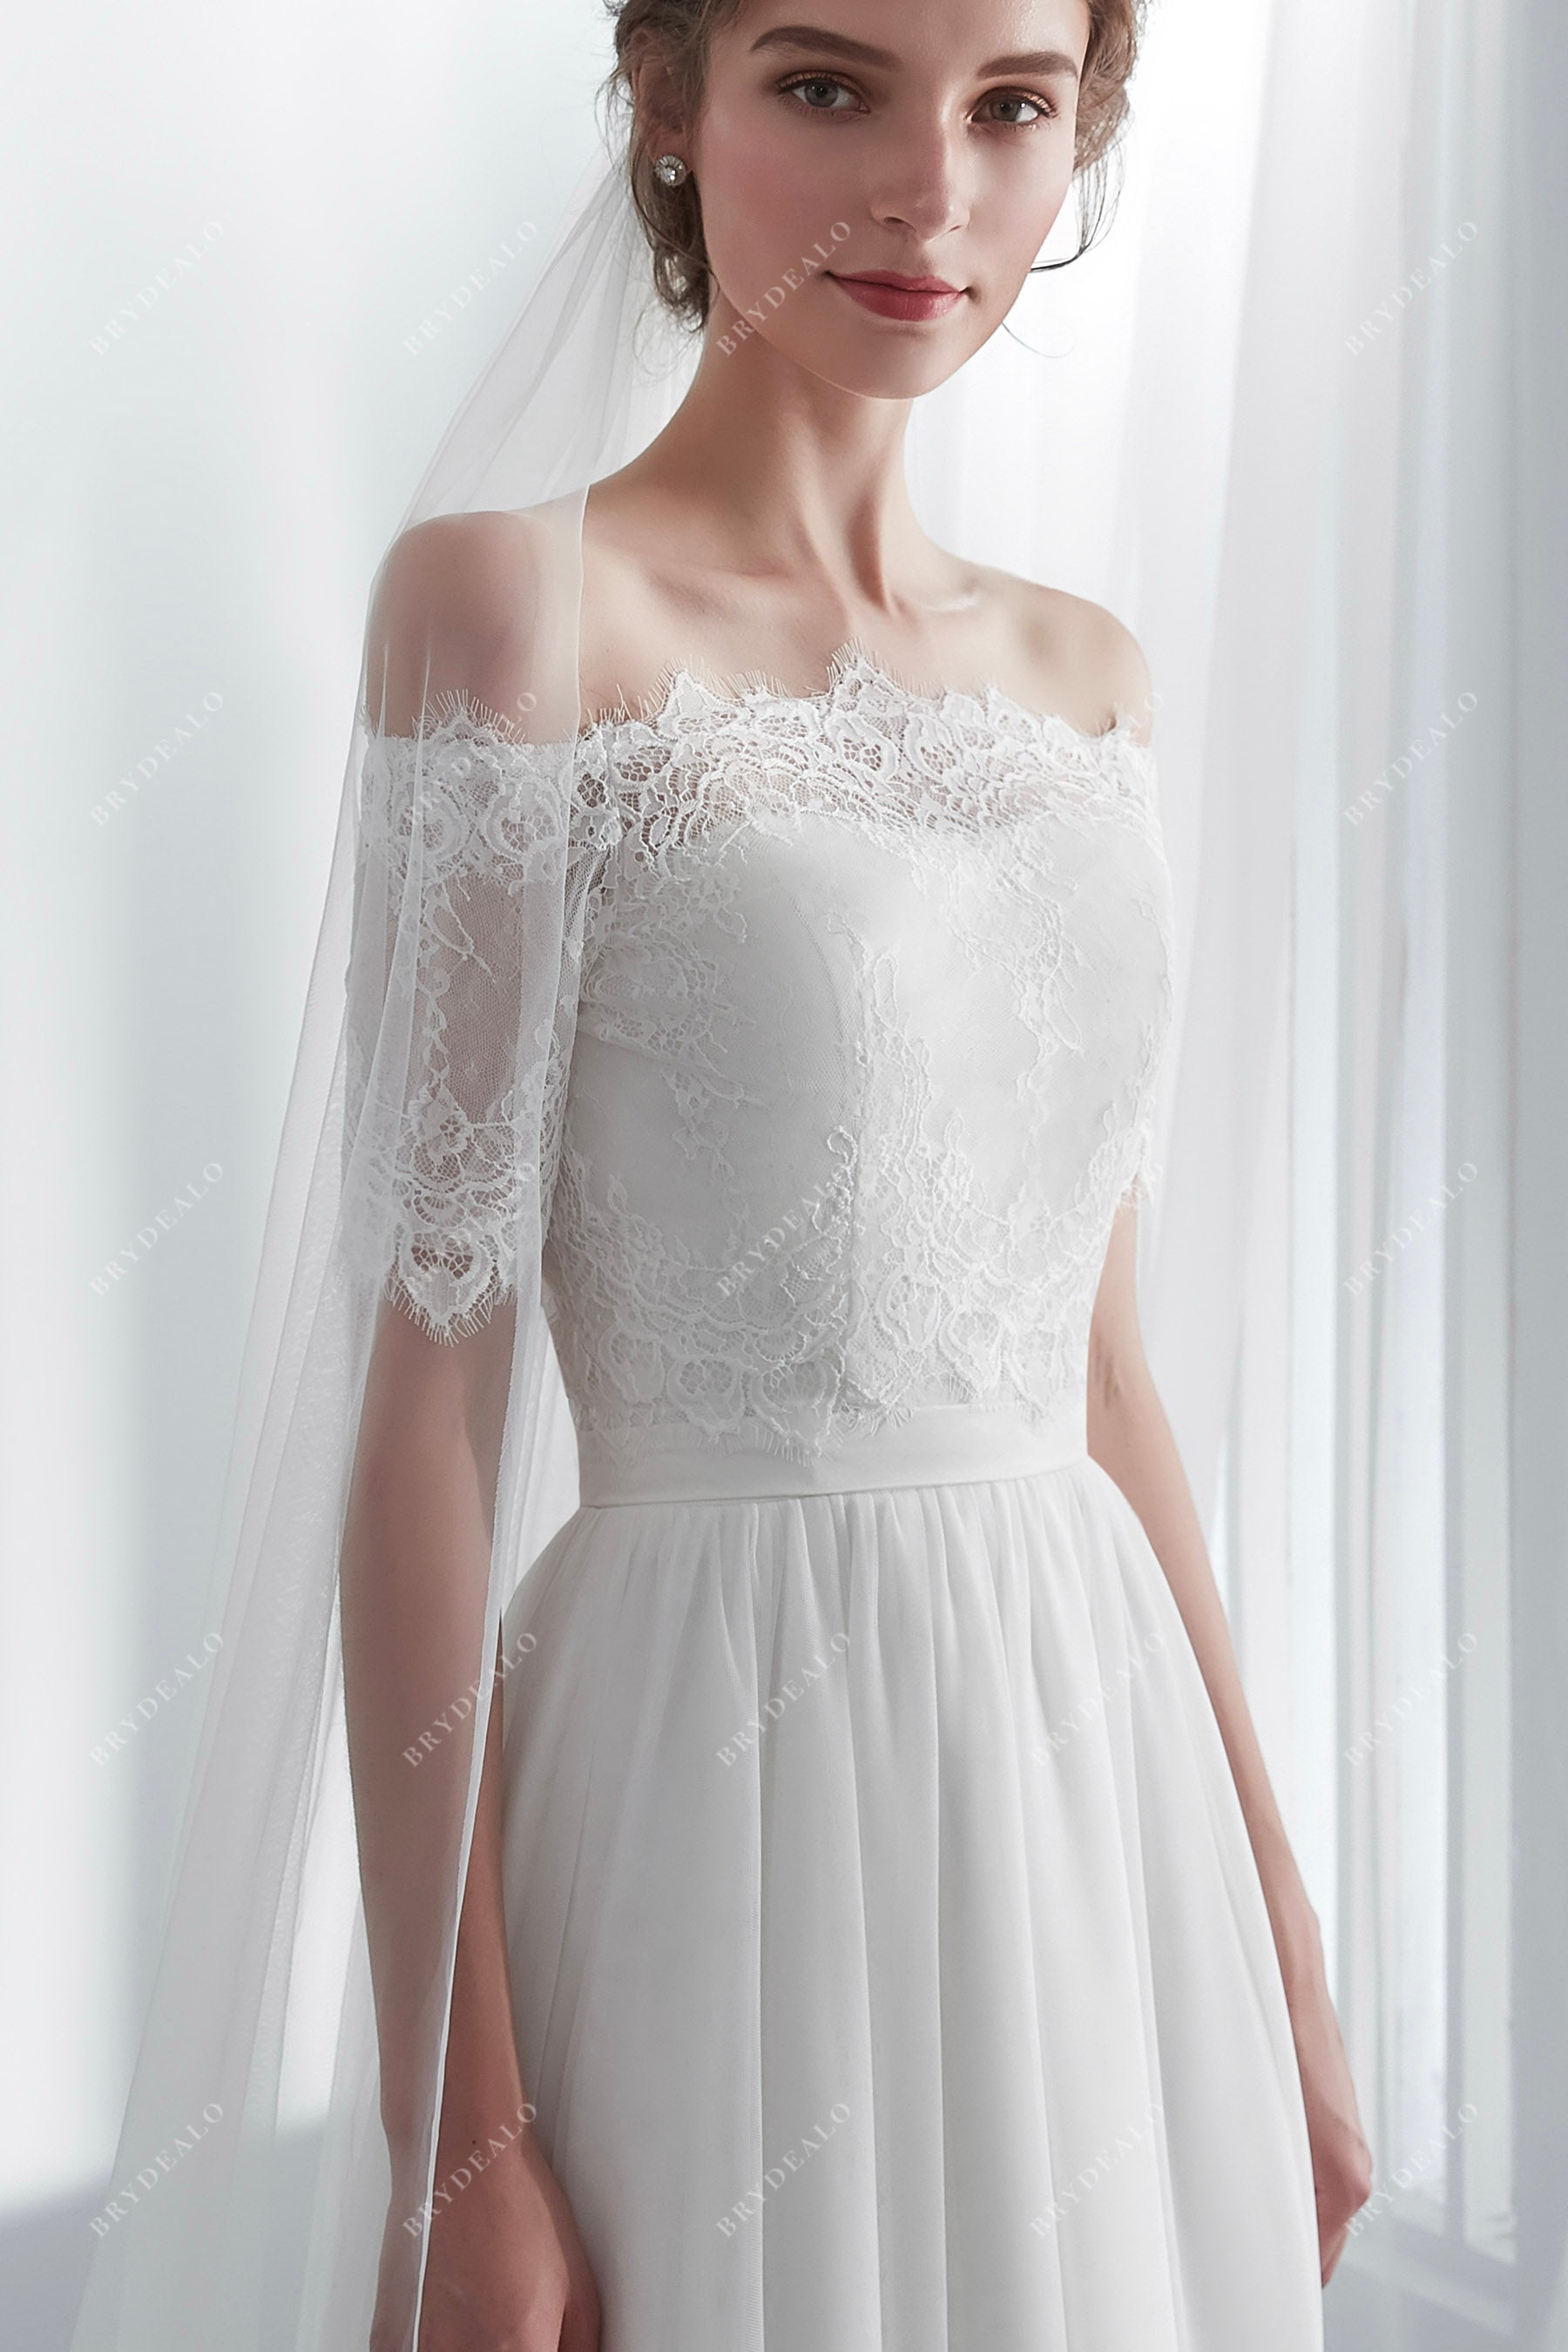 Bridal Gown with Ivory Lace Bolero